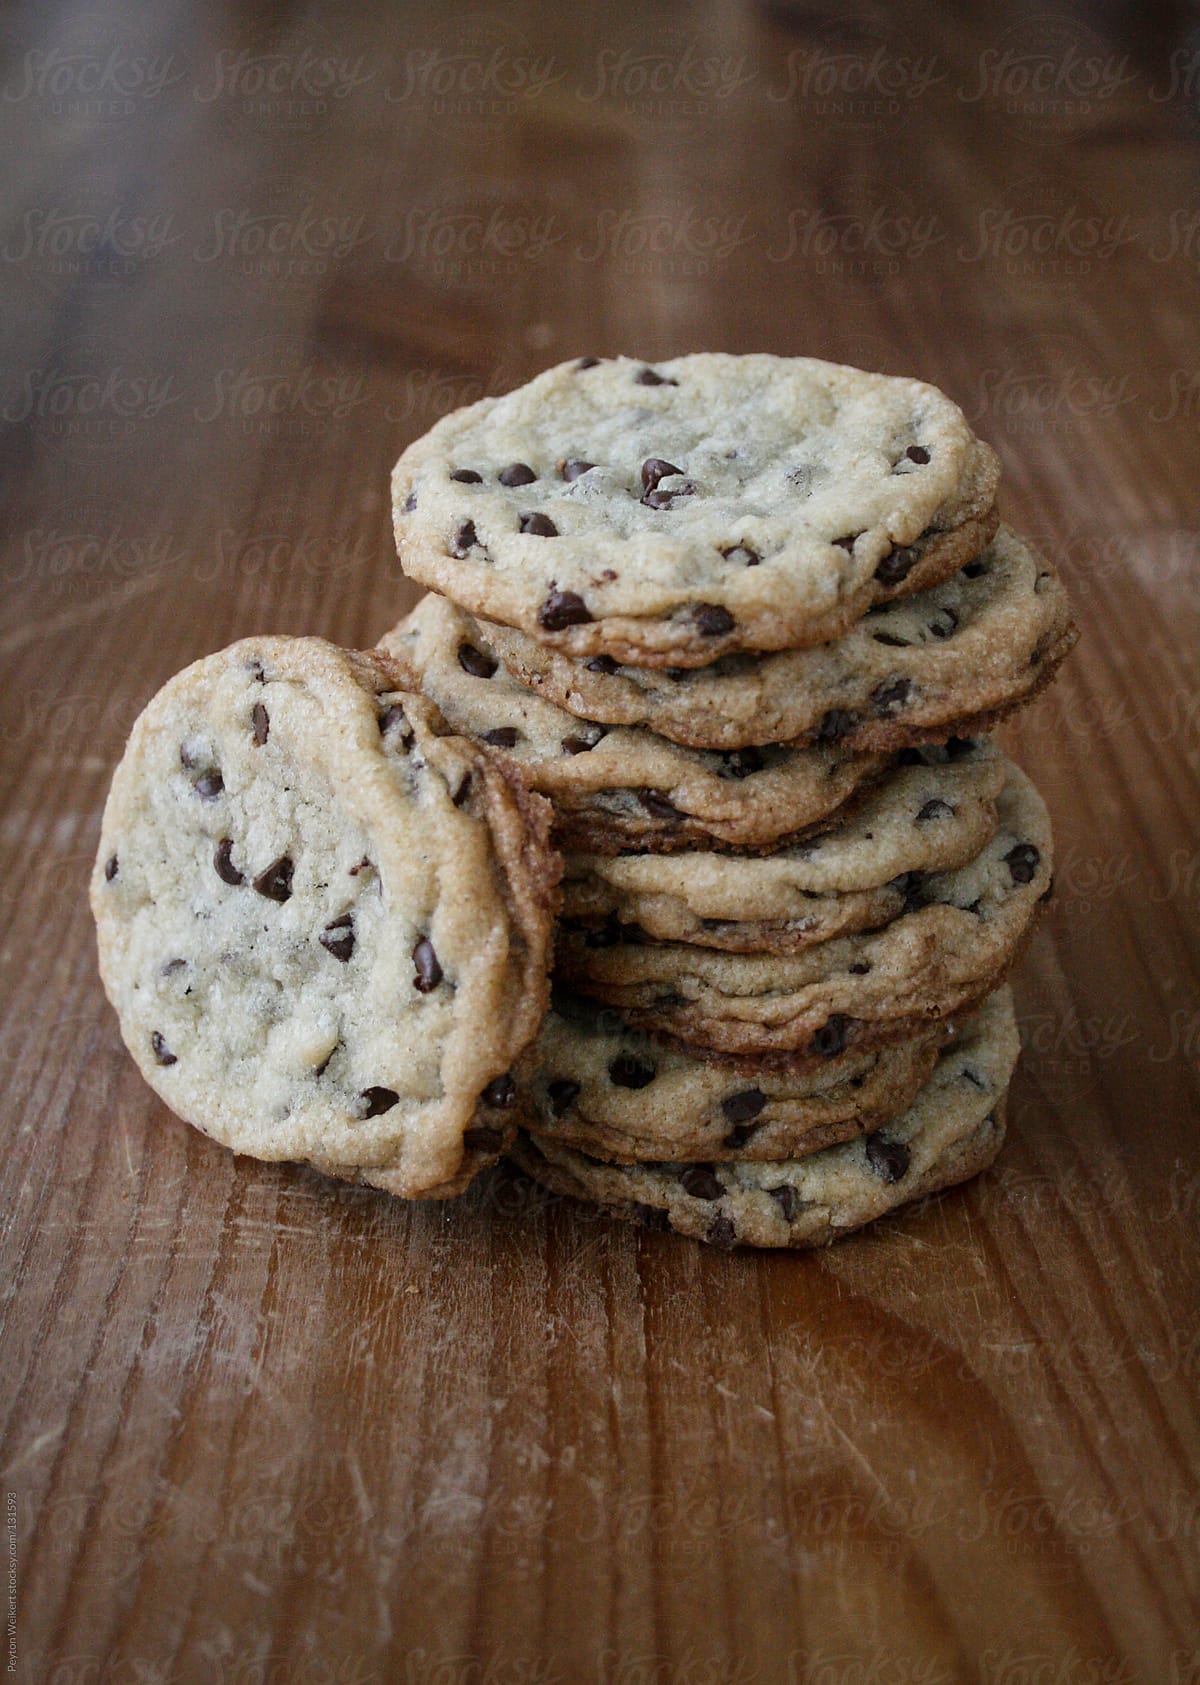 Pile of homemade chocolate chip cookies